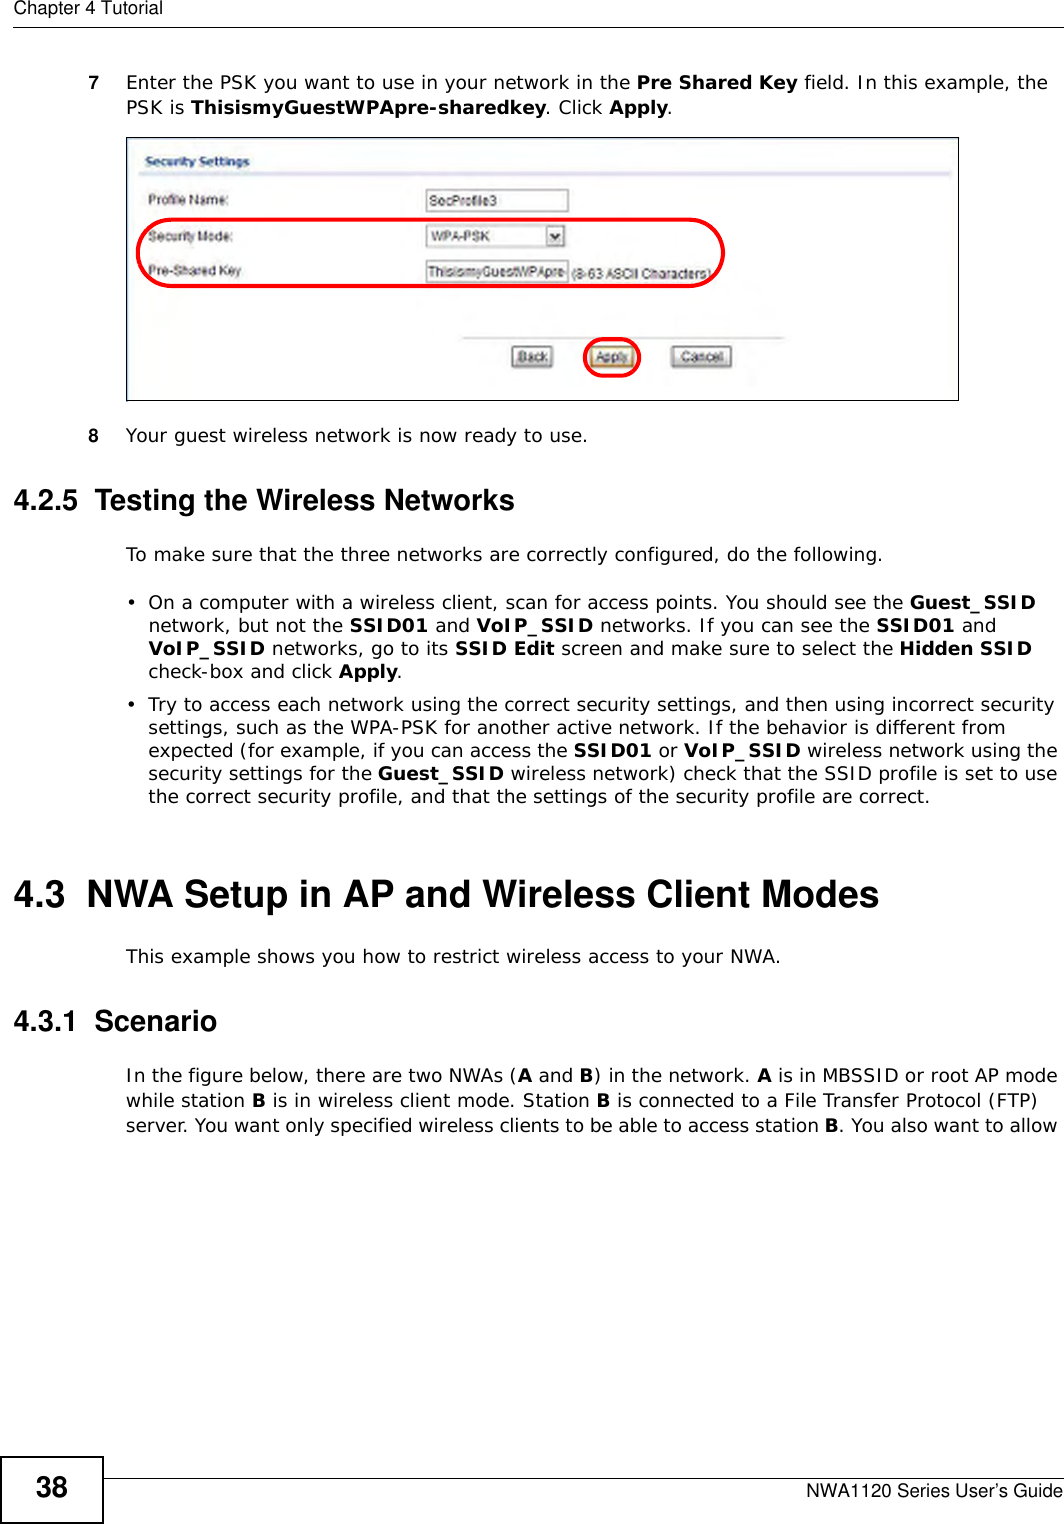 Chapter 4 TutorialNWA1120 Series User’s Guide387Enter the PSK you want to use in your network in the Pre Shared Key field. In this example, the PSK is ThisismyGuestWPApre-sharedkey. Click Apply. 8Your guest wireless network is now ready to use.4.2.5  Testing the Wireless NetworksTo make sure that the three networks are correctly configured, do the following.• On a computer with a wireless client, scan for access points. You should see the Guest_SSID network, but not the SSID01 and VoIP_SSID networks. If you can see the SSID01 and VoIP_SSID networks, go to its SSID Edit screen and make sure to select the Hidden SSID check-box and click Apply.• Try to access each network using the correct security settings, and then using incorrect security settings, such as the WPA-PSK for another active network. If the behavior is different from expected (for example, if you can access the SSID01 or VoIP_SSID wireless network using the security settings for the Guest_SSID wireless network) check that the SSID profile is set to use the correct security profile, and that the settings of the security profile are correct.4.3  NWA Setup in AP and Wireless Client ModesThis example shows you how to restrict wireless access to your NWA.4.3.1  ScenarioIn the figure below, there are two NWAs (A and B) in the network. A is in MBSSID or root AP mode while station B is in wireless client mode. Station B is connected to a File Transfer Protocol (FTP) server. You want only specified wireless clients to be able to access station B. You also want to allow 